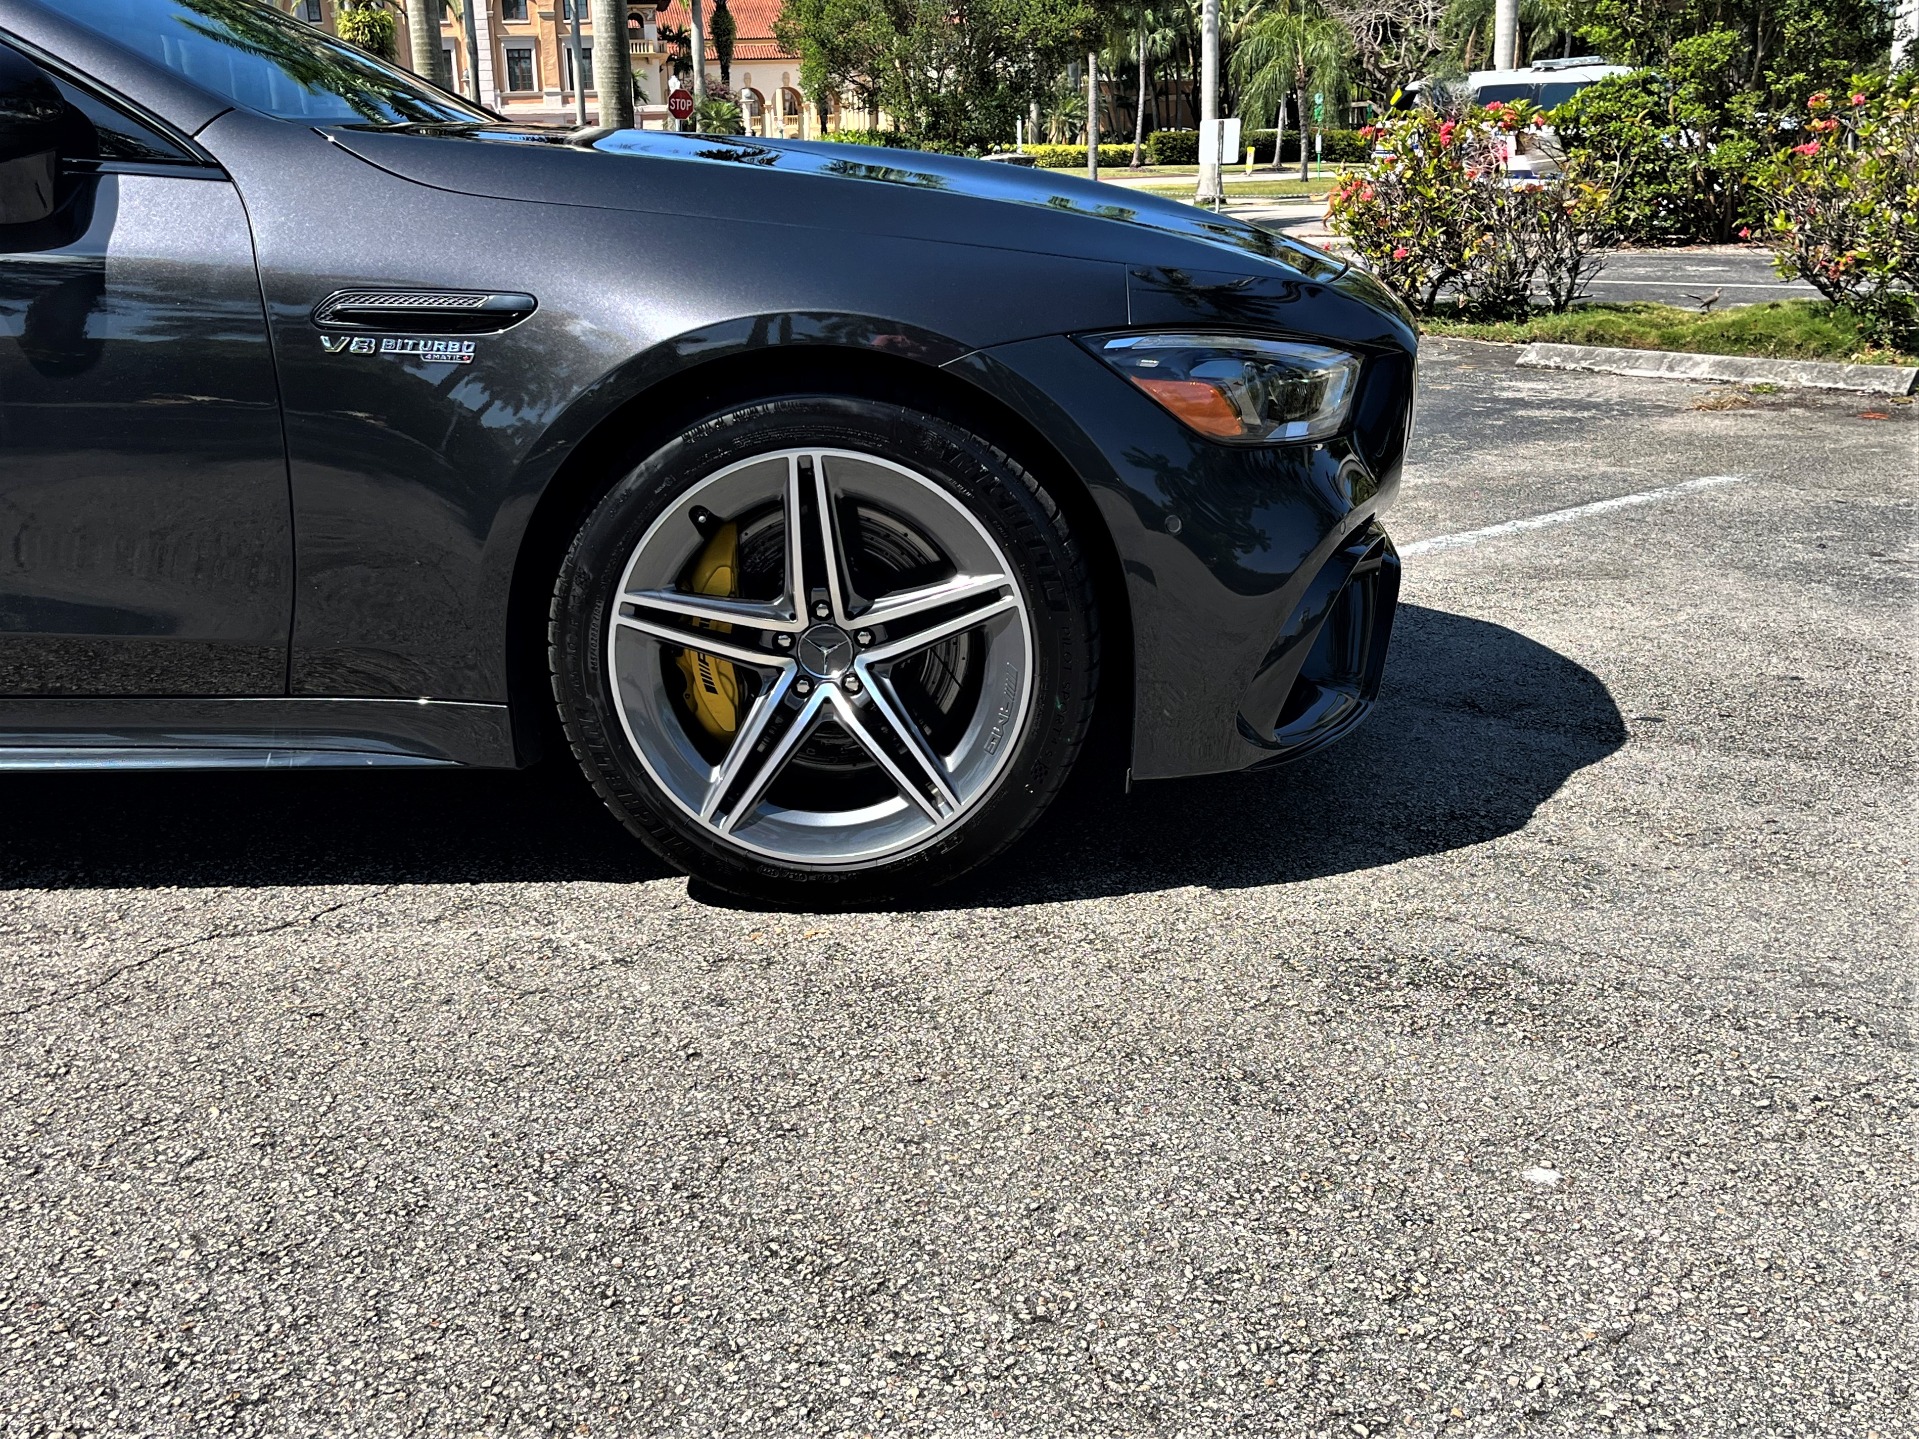 Used 2019 Mercedes-Benz AMG GT 63 S for sale $149,850 at The Gables Sports Cars in Miami FL 33146 3